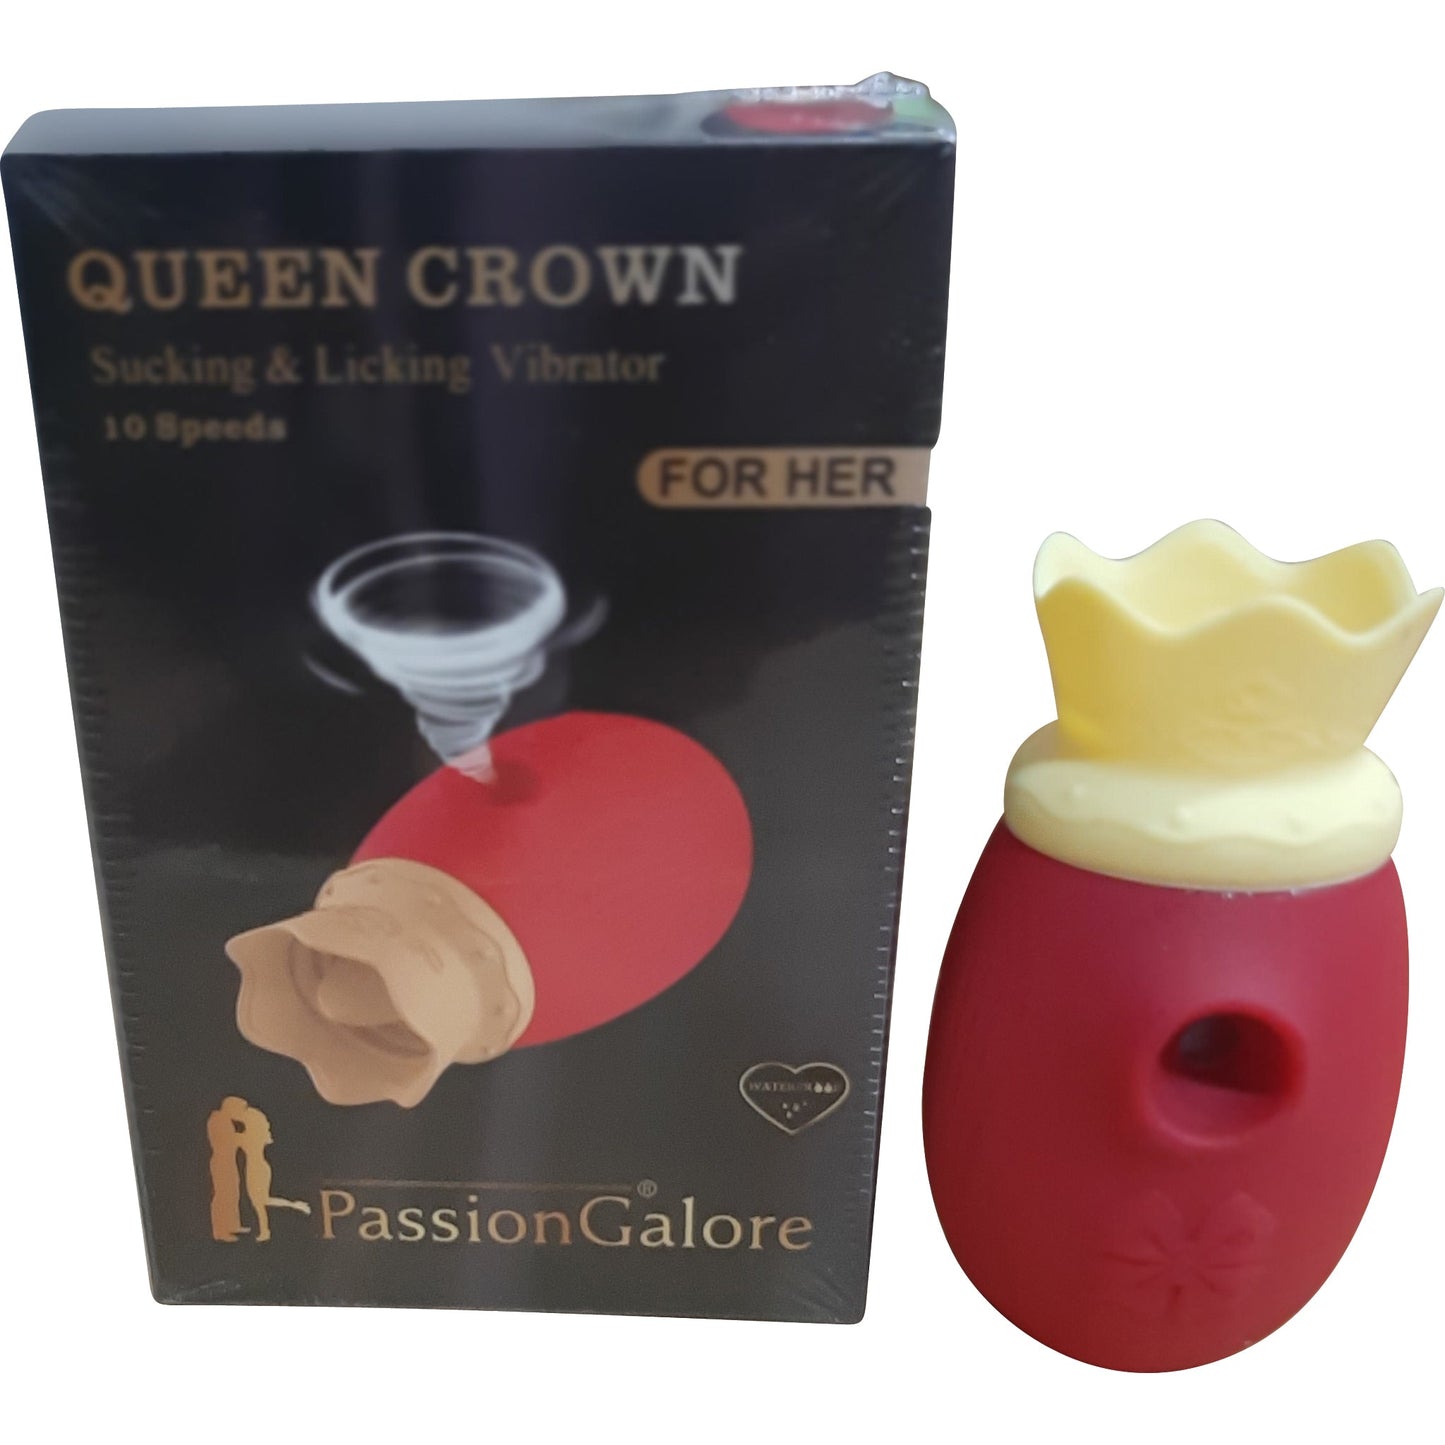 Queen Crown - Sucking & Licking - 10 Speed - RED PassionGalore